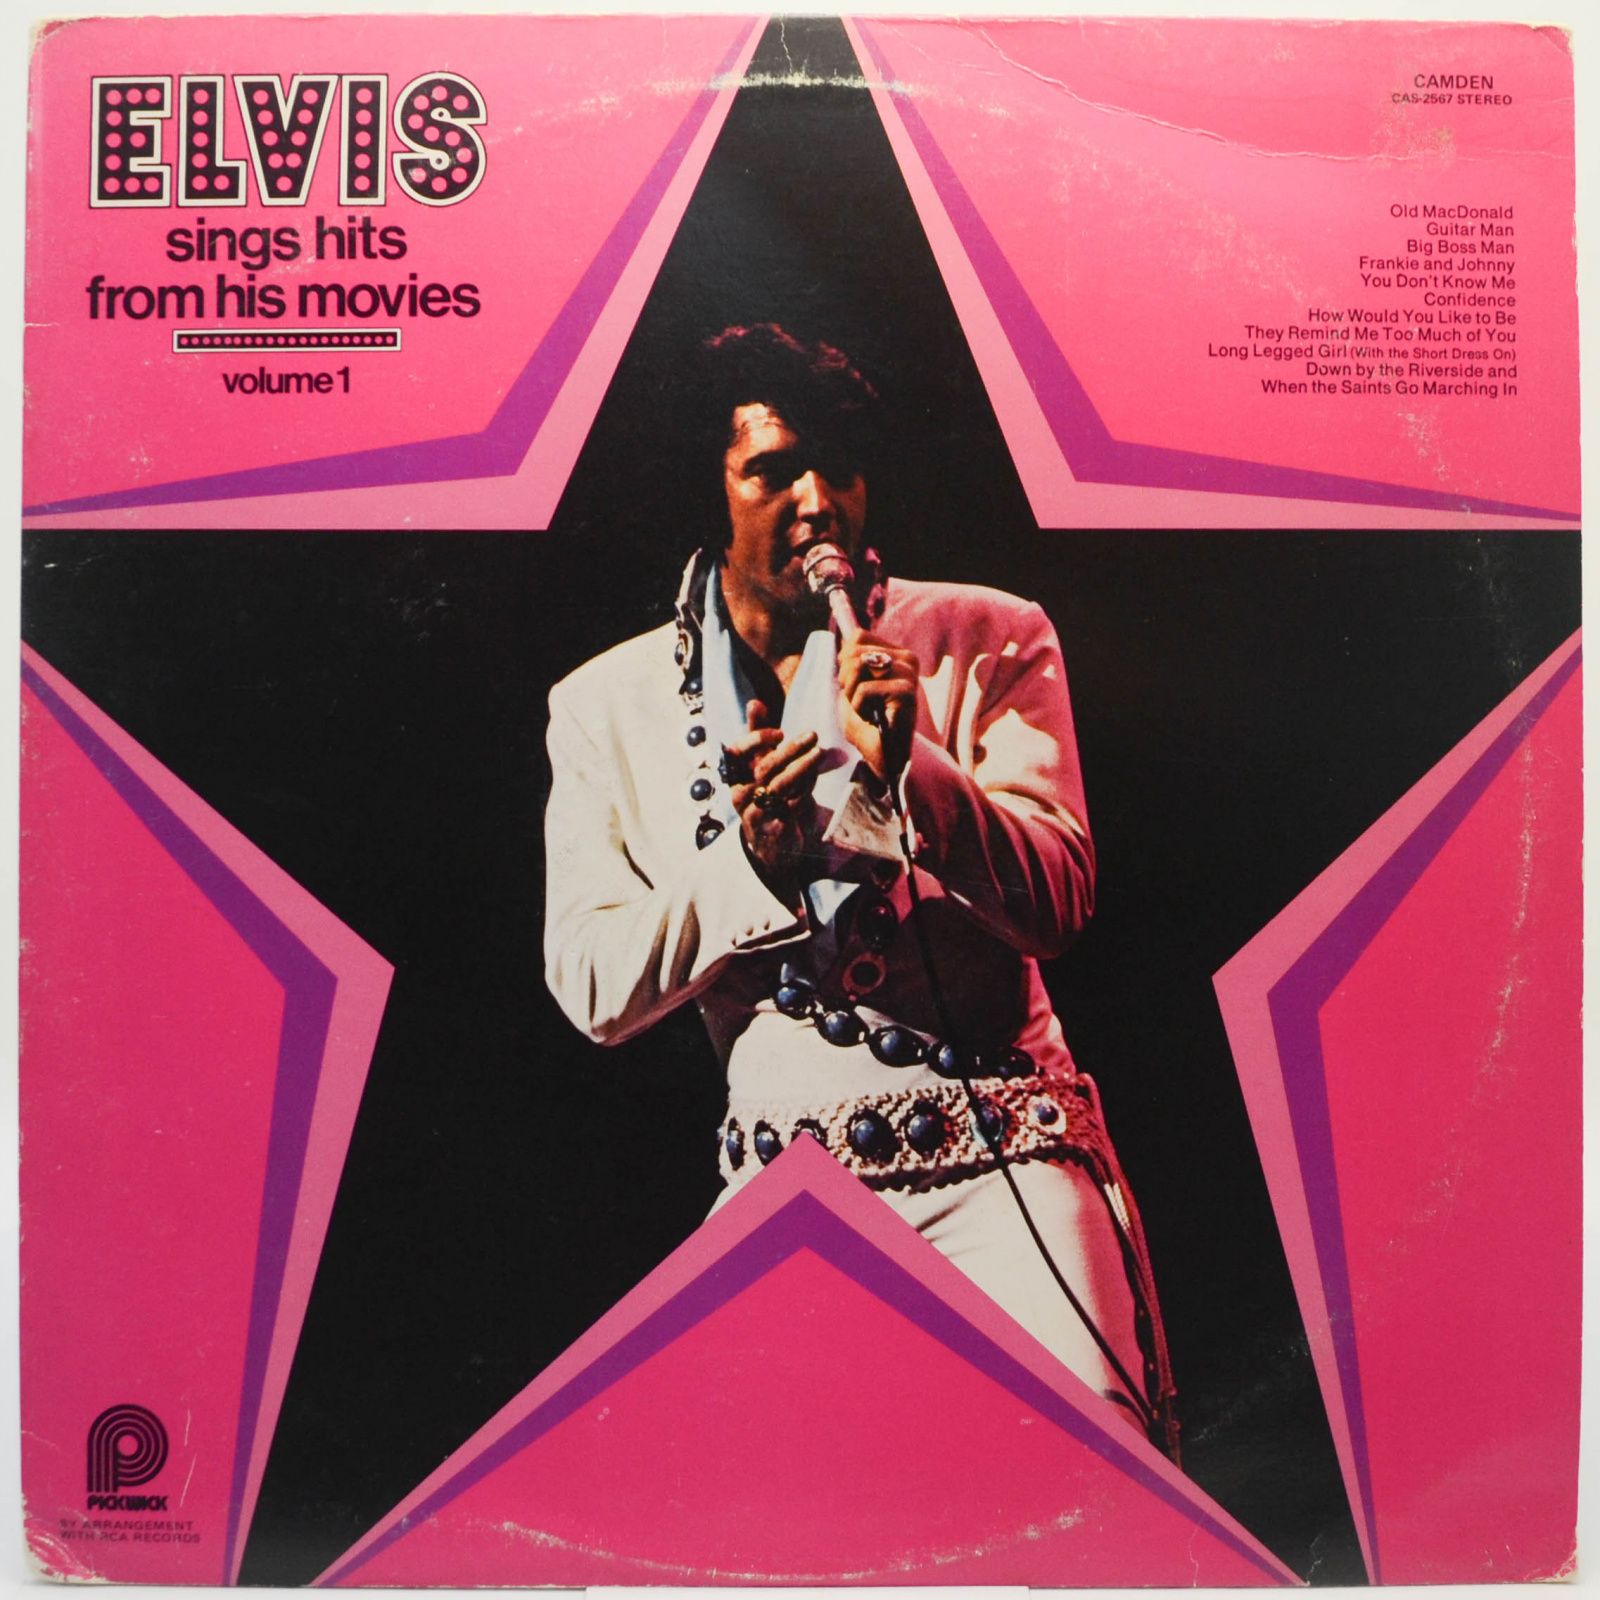 Sings Hits From His Movies Volume 1, 1972